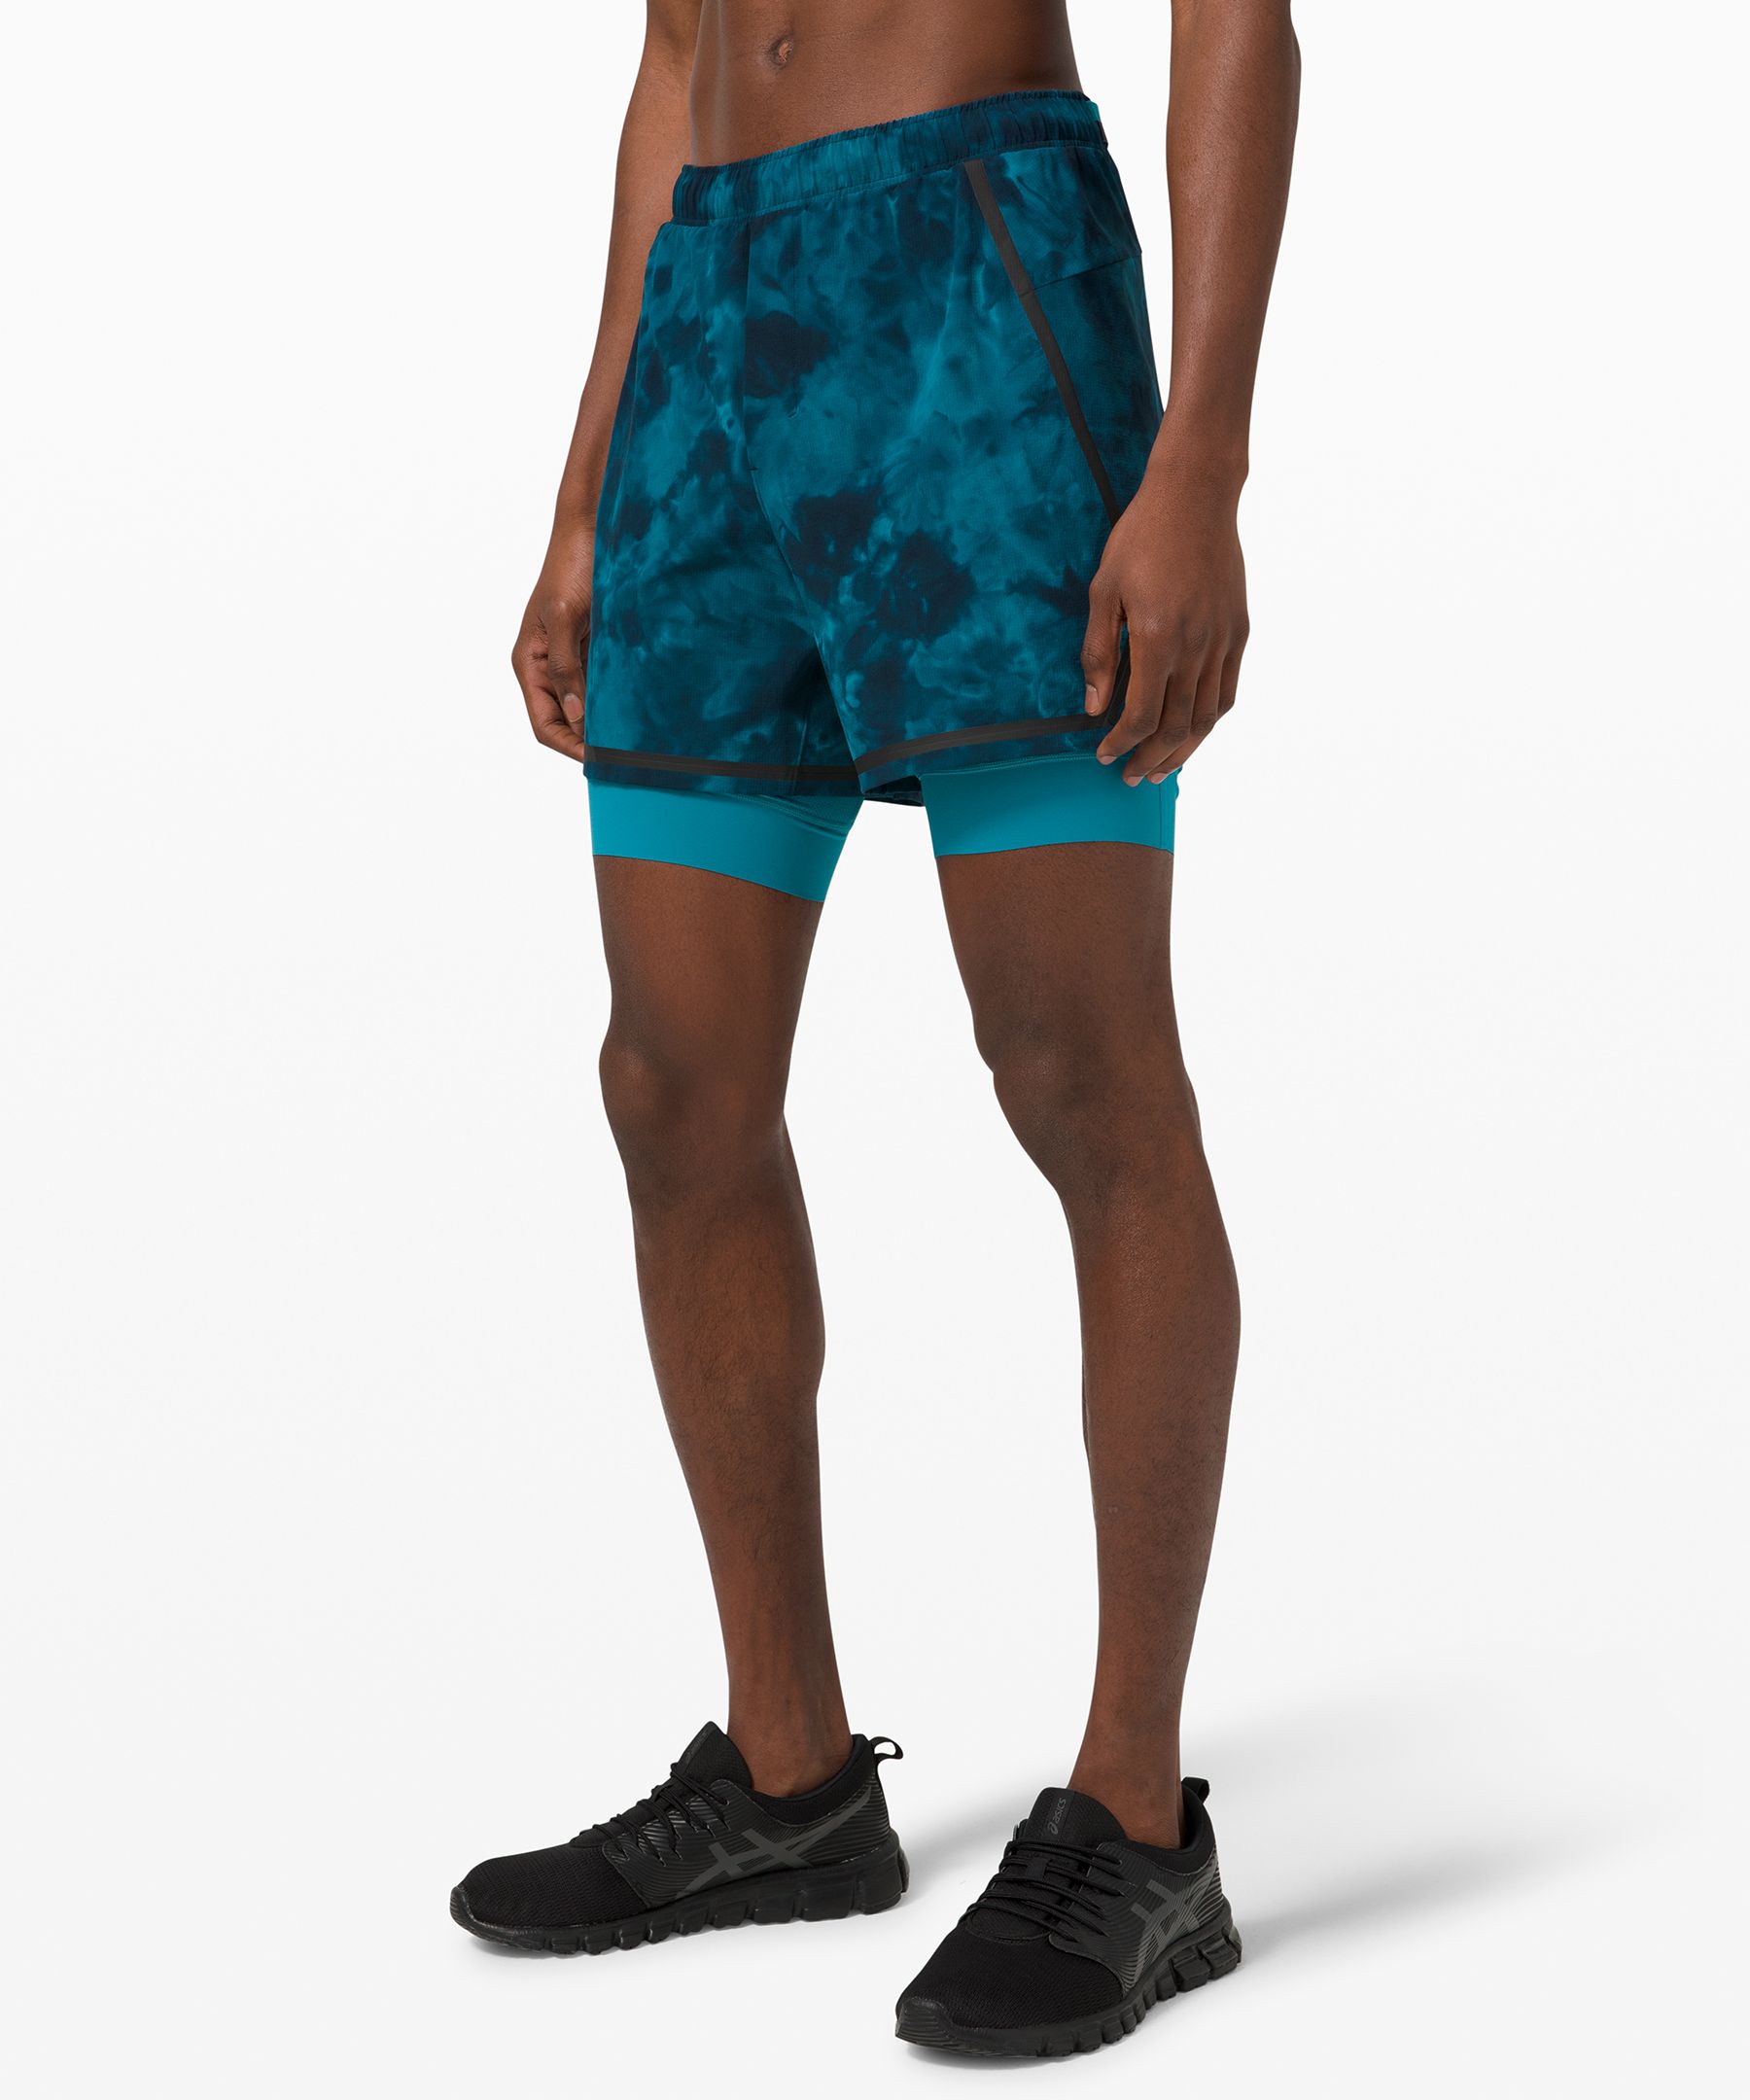 Product Review: lululemon Surge Short - The Runners Edge